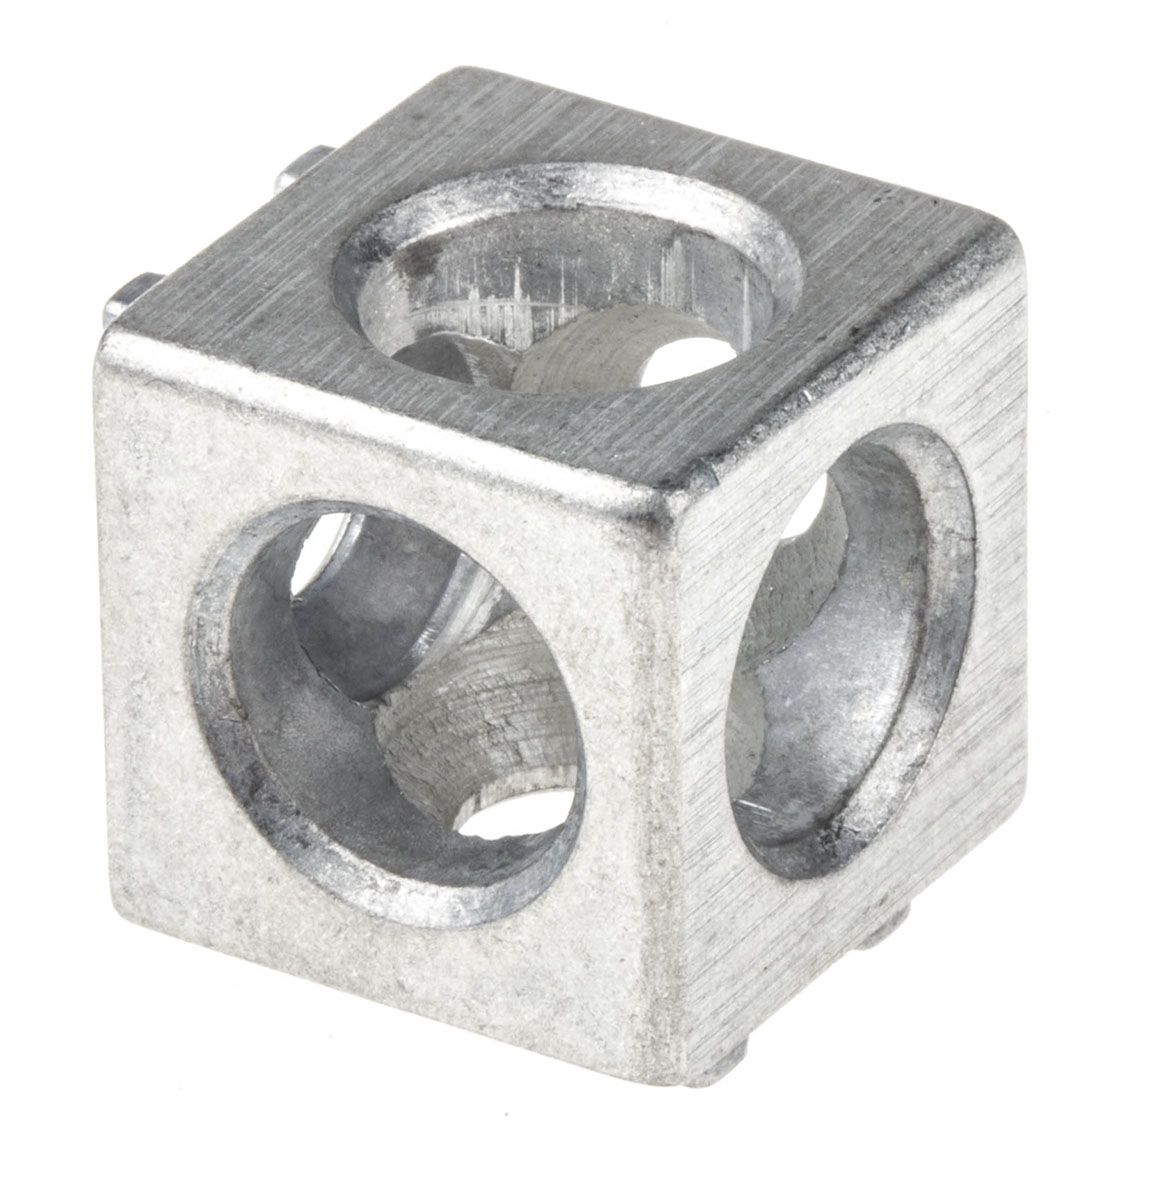 Bosch Rexroth Connecting Component, Corner Cube Kit, strut profile 20 mm, groove Size 6mm